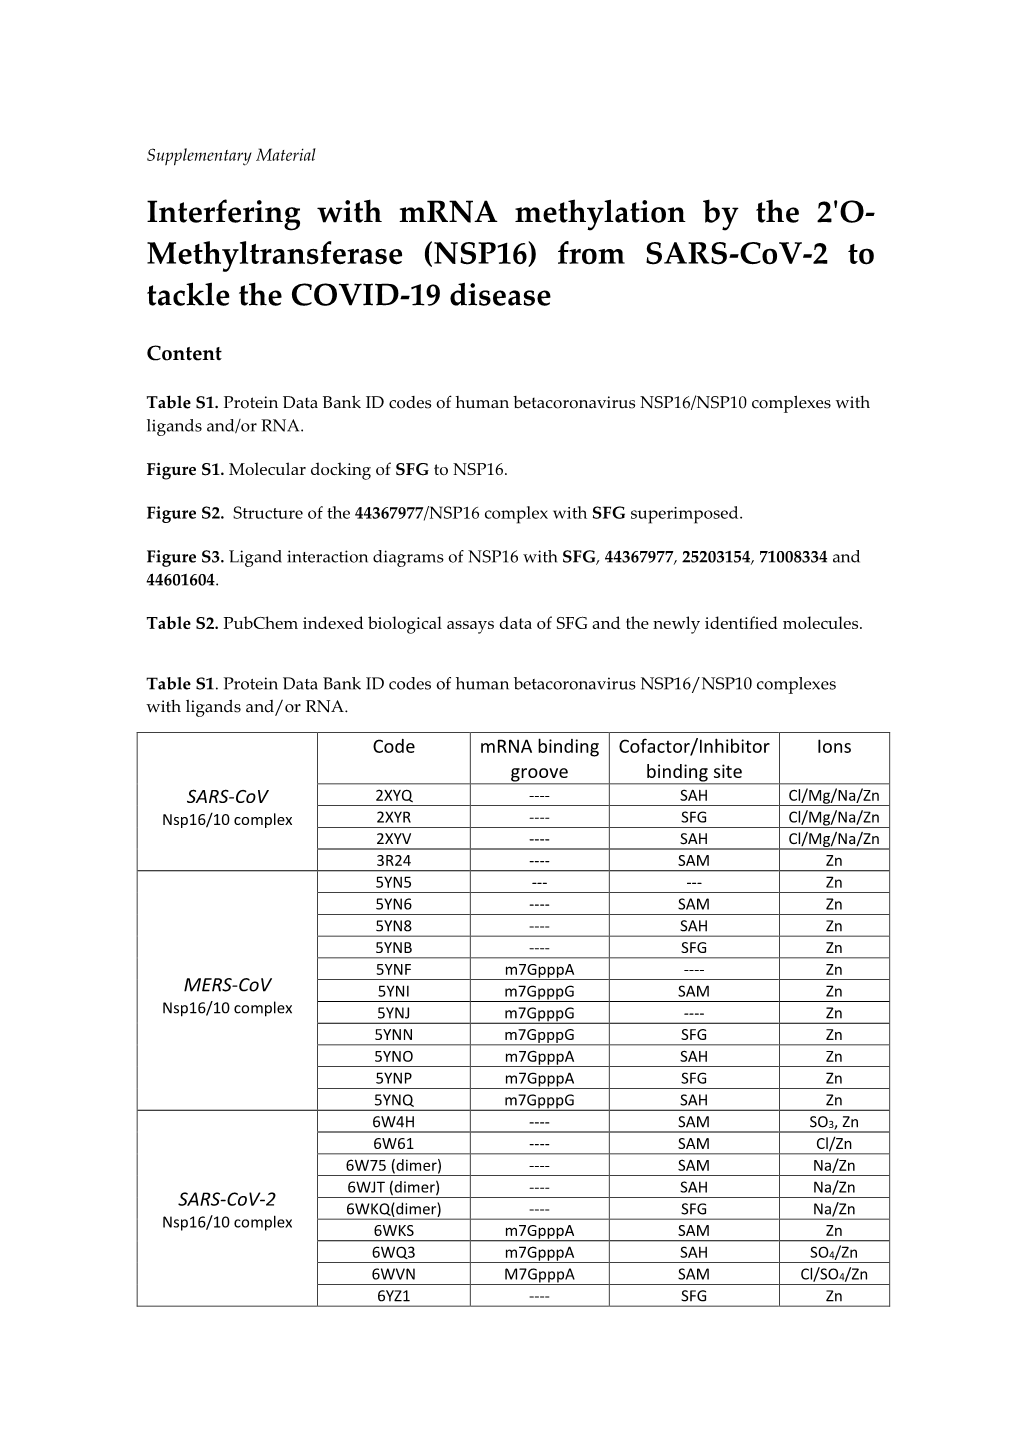 Methyltransferase (NSP16) from SARS-Cov-2 to Tackle the COVID-19 Disease